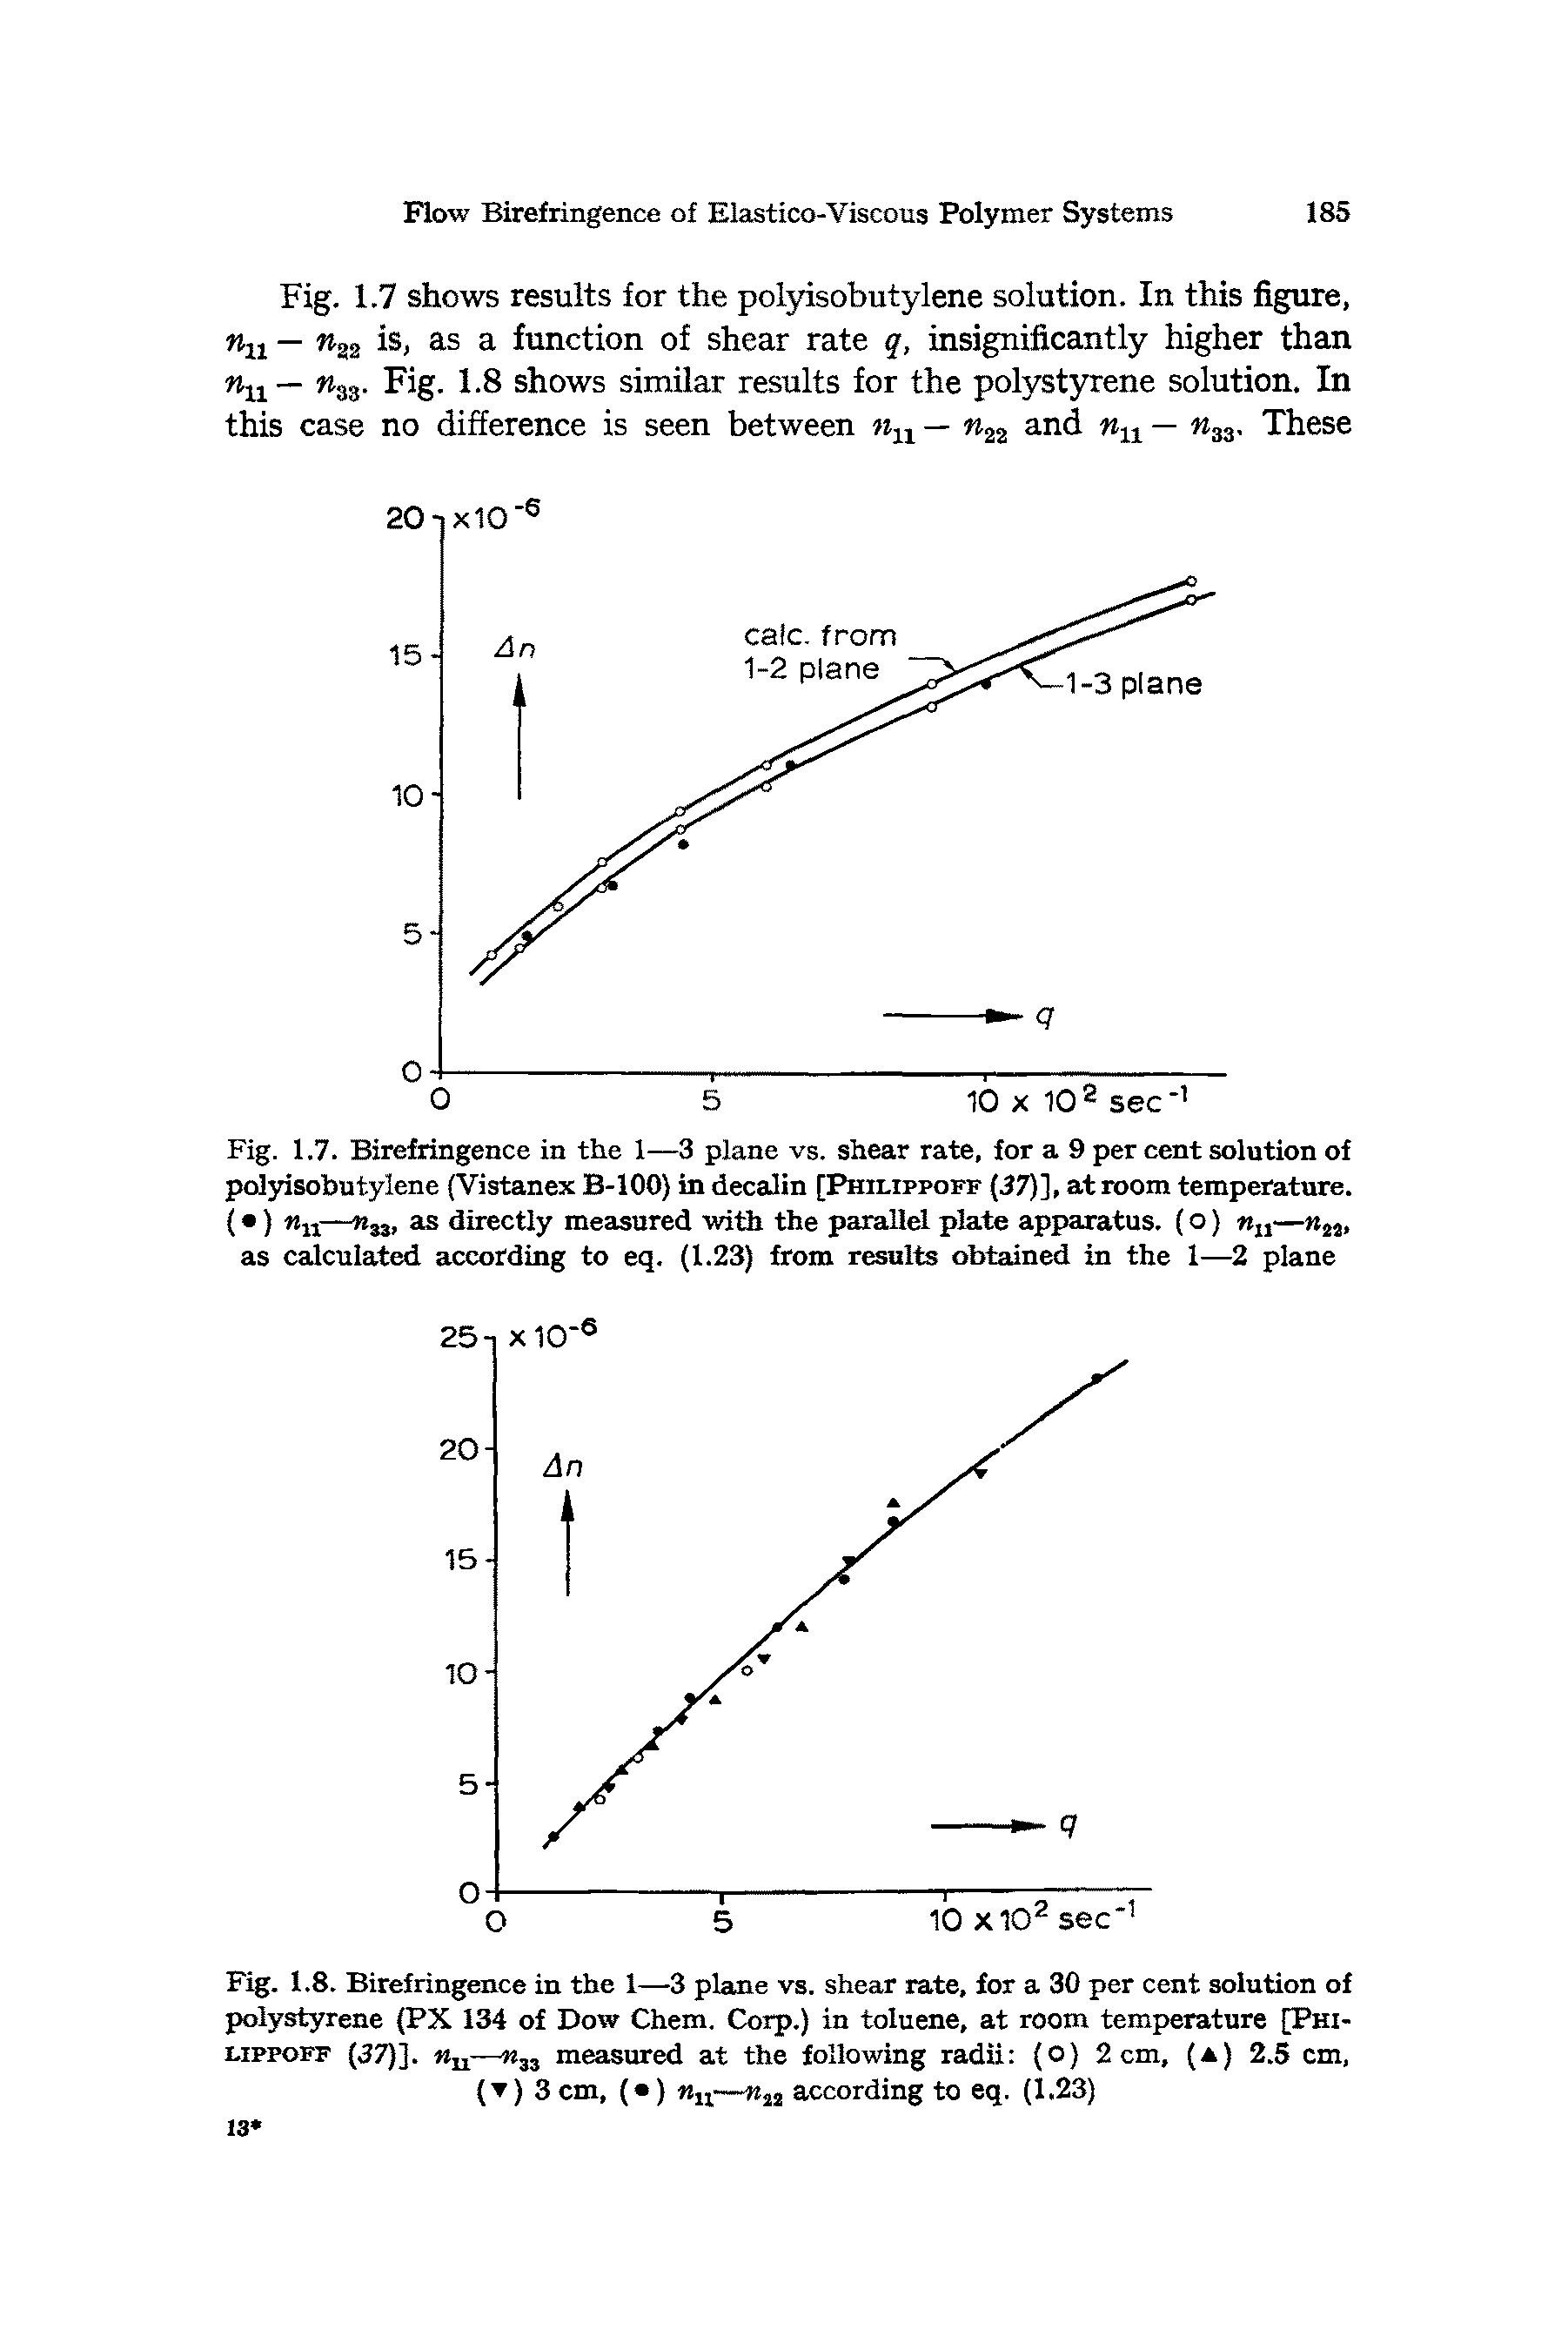 Fig. 1.7. Birefringence in the 1—3 plane vs. shear rate, for a 9 per cent solution of polyisobutylene (Vistanex B-100) in decalin [Philippoff (37)], at room temperature. ( ) nn—n33, as directly measured with the parallel plate apparatus. (o) wn— 22, as calculated according to eq. (1.23) from results obtained in the 1—2 plane...